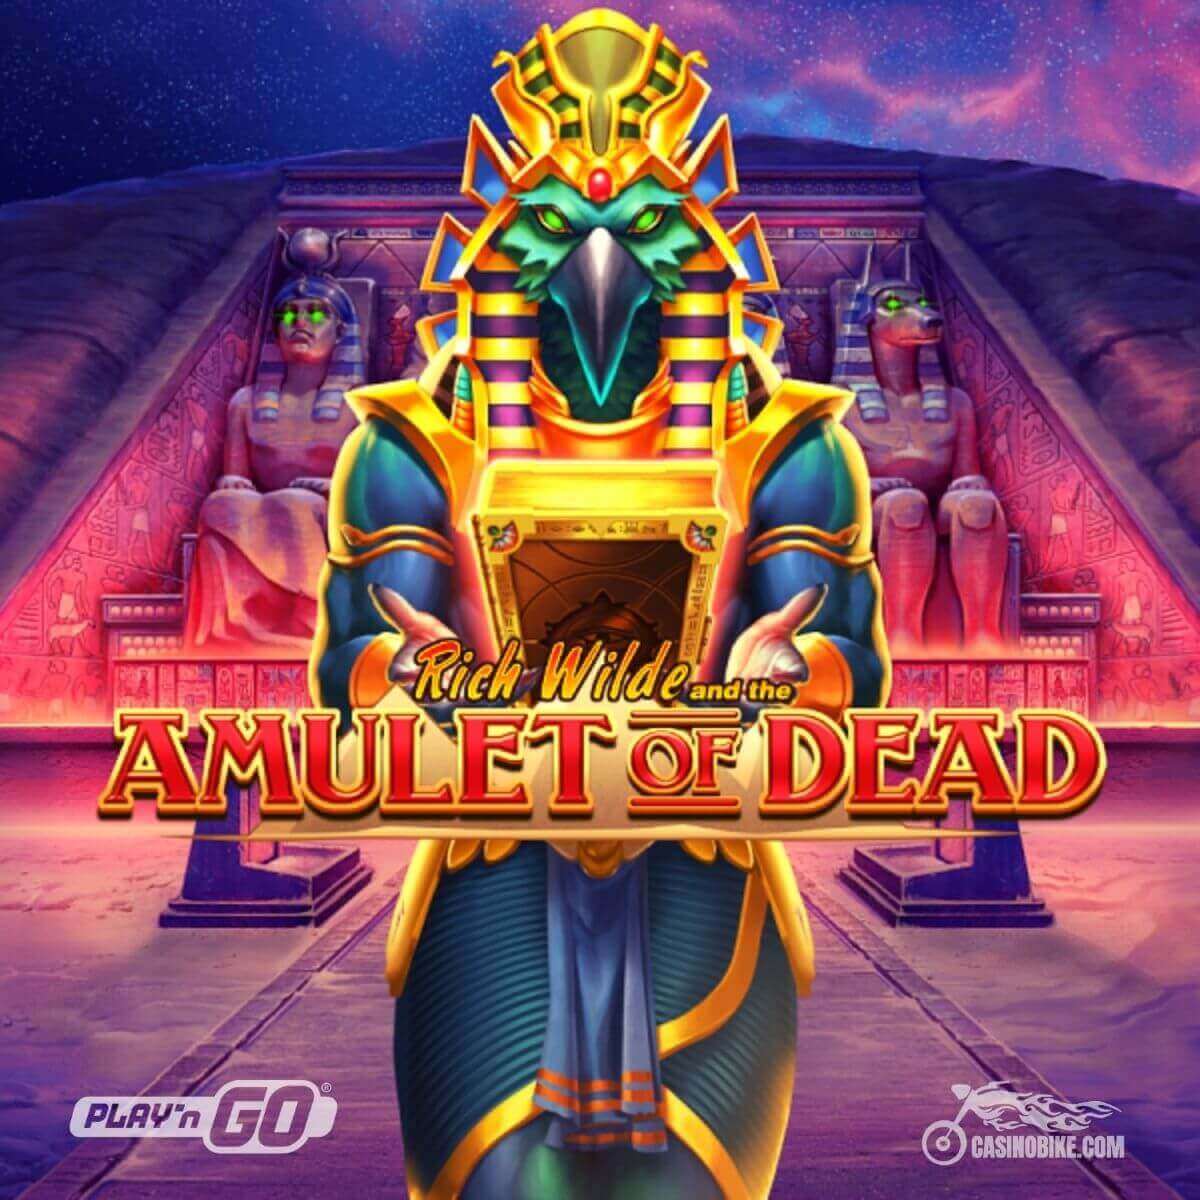 Rich Wilde and the Amulet of Dead Slot by Play'n Go